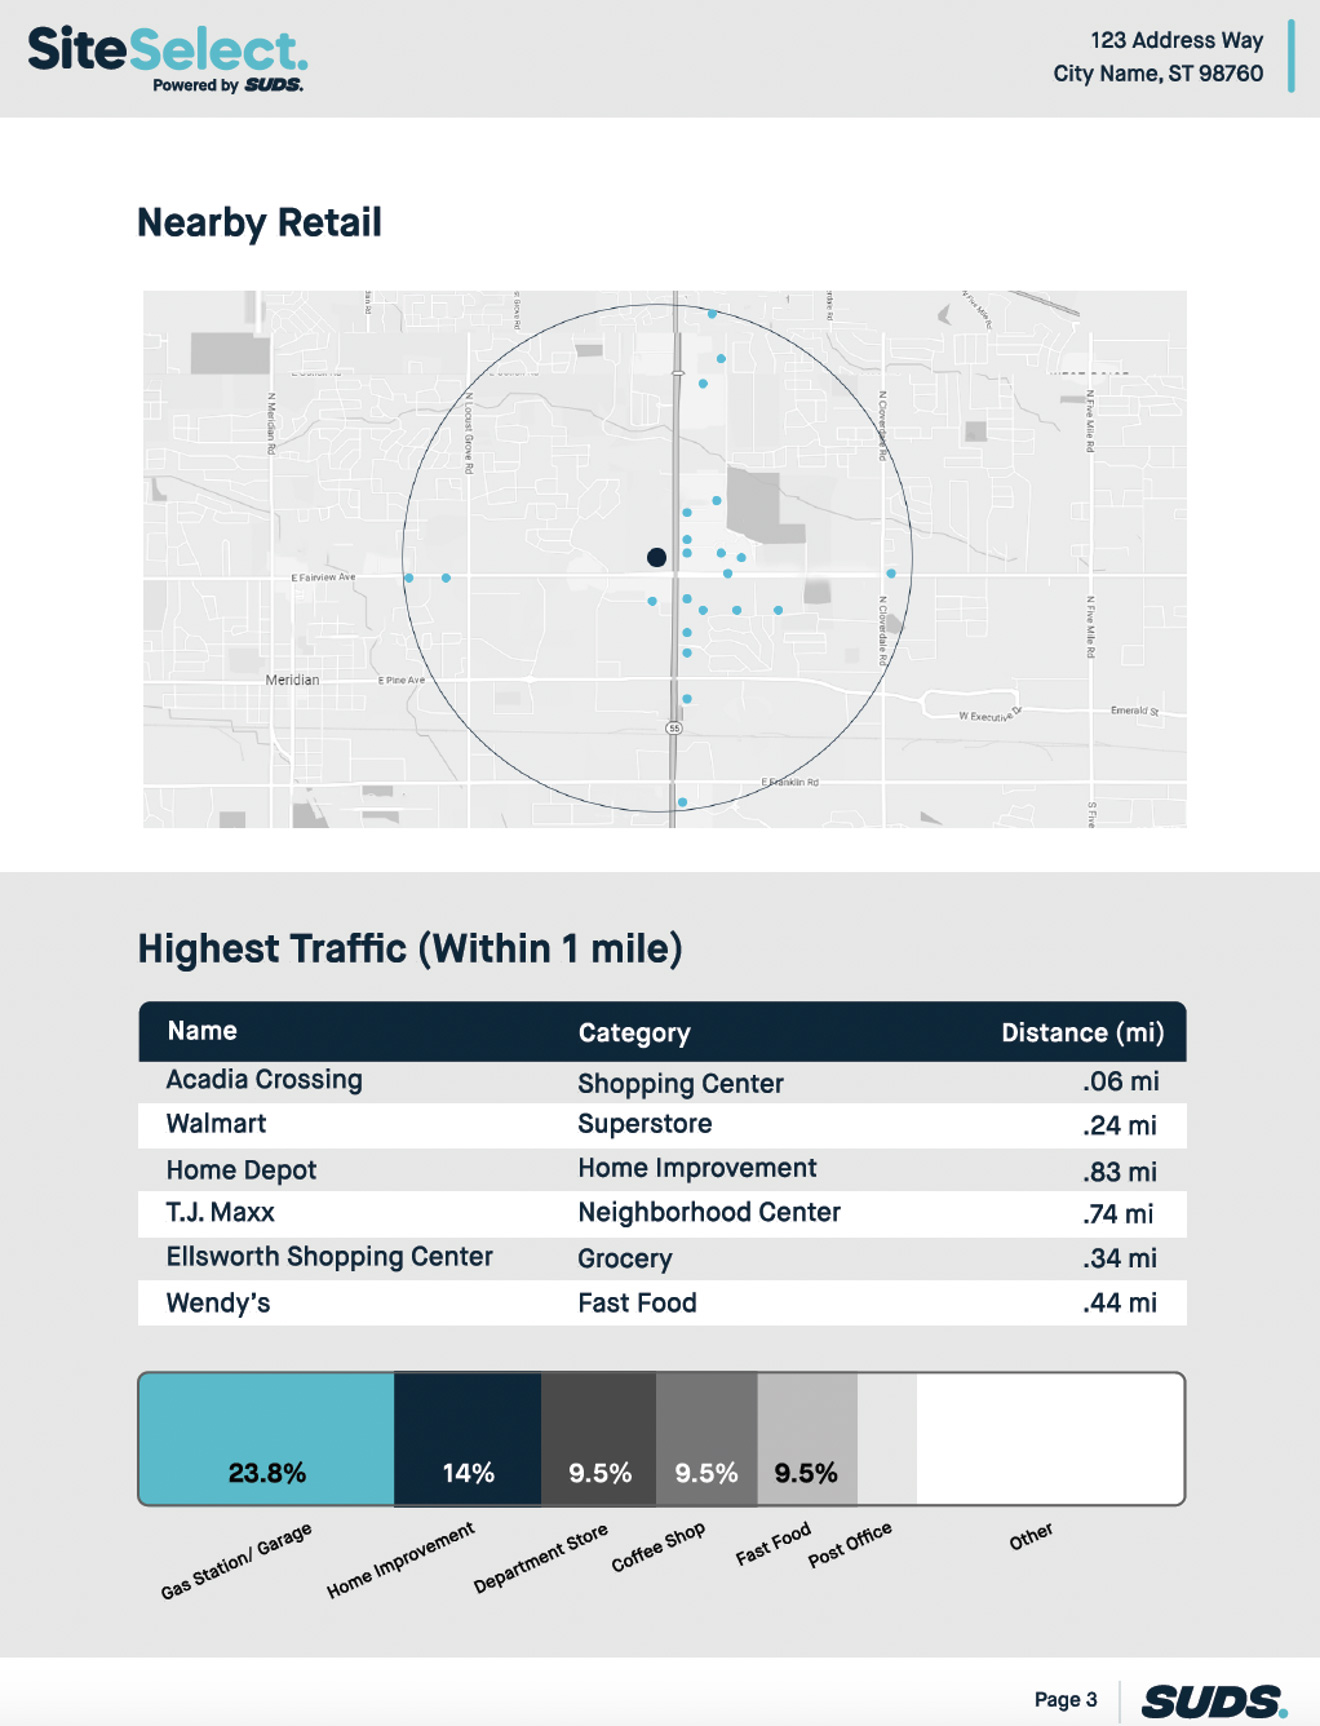 siteselect nearby retail report